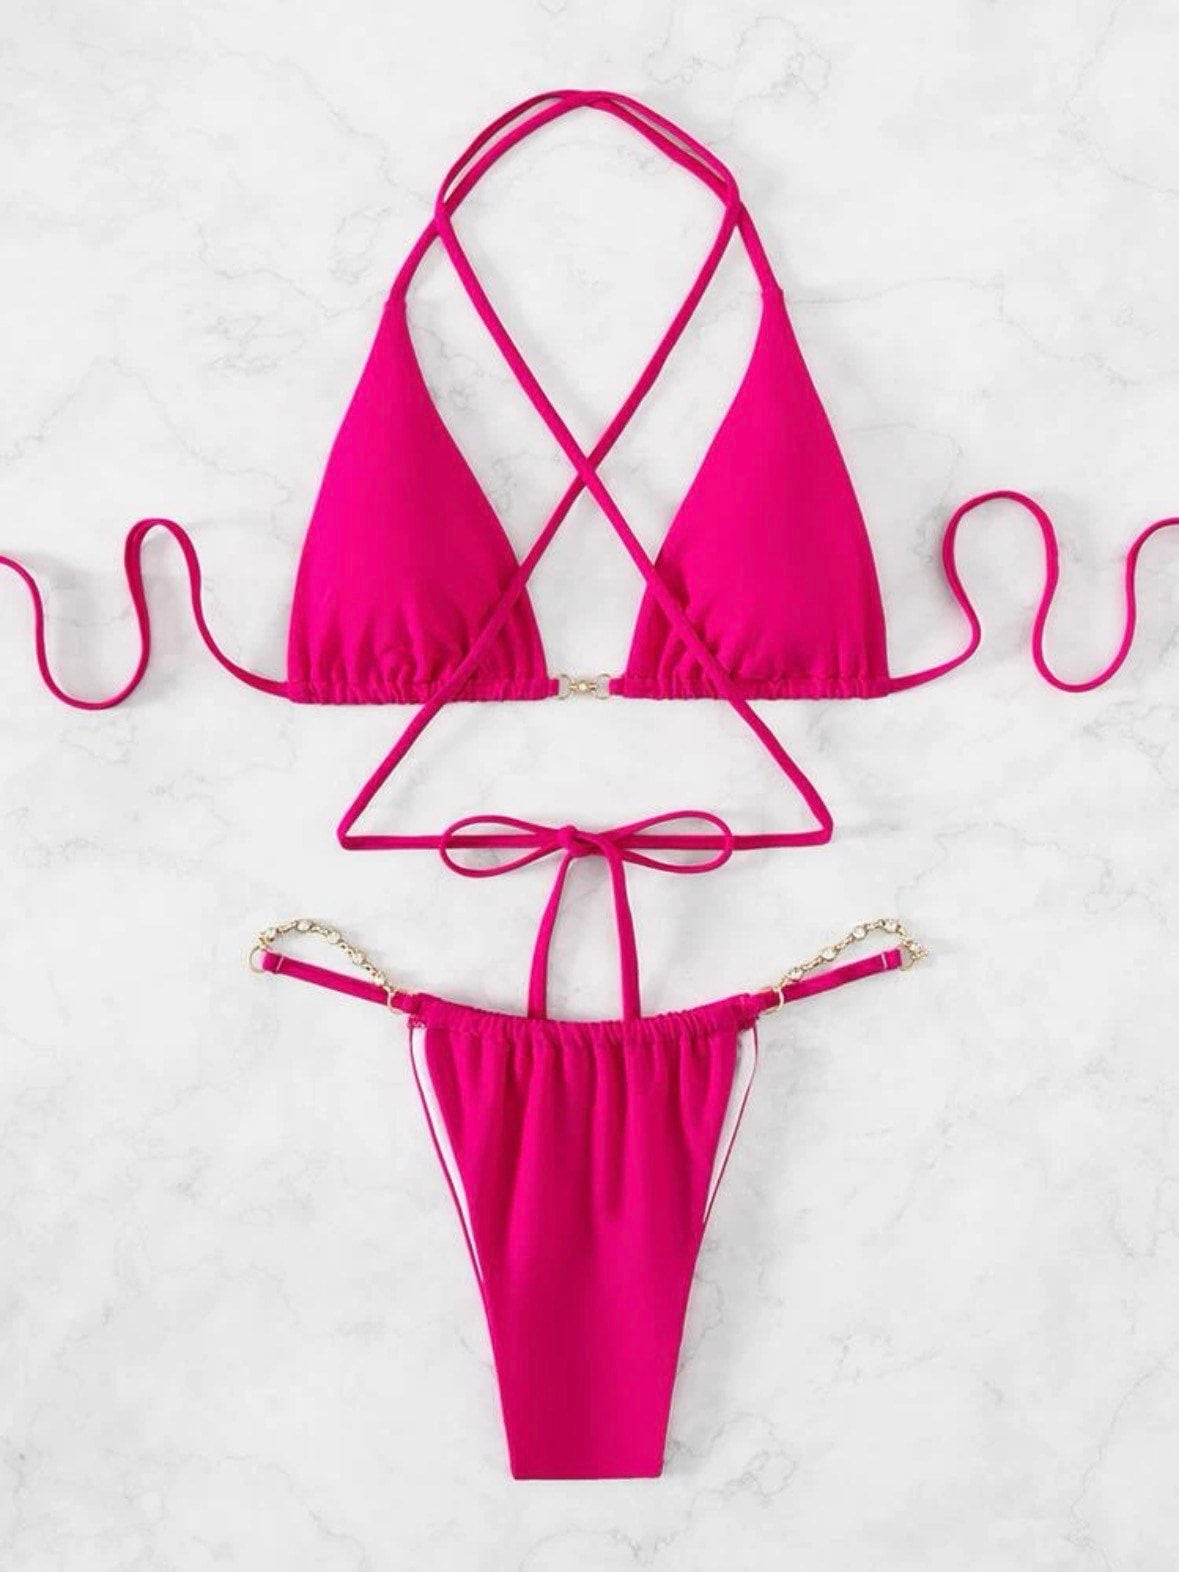 The Lovely LauLau Pink Rhinestone Barbie swim bikini with tie sides and hot pink triangle top tie and bottoms swimsuit set